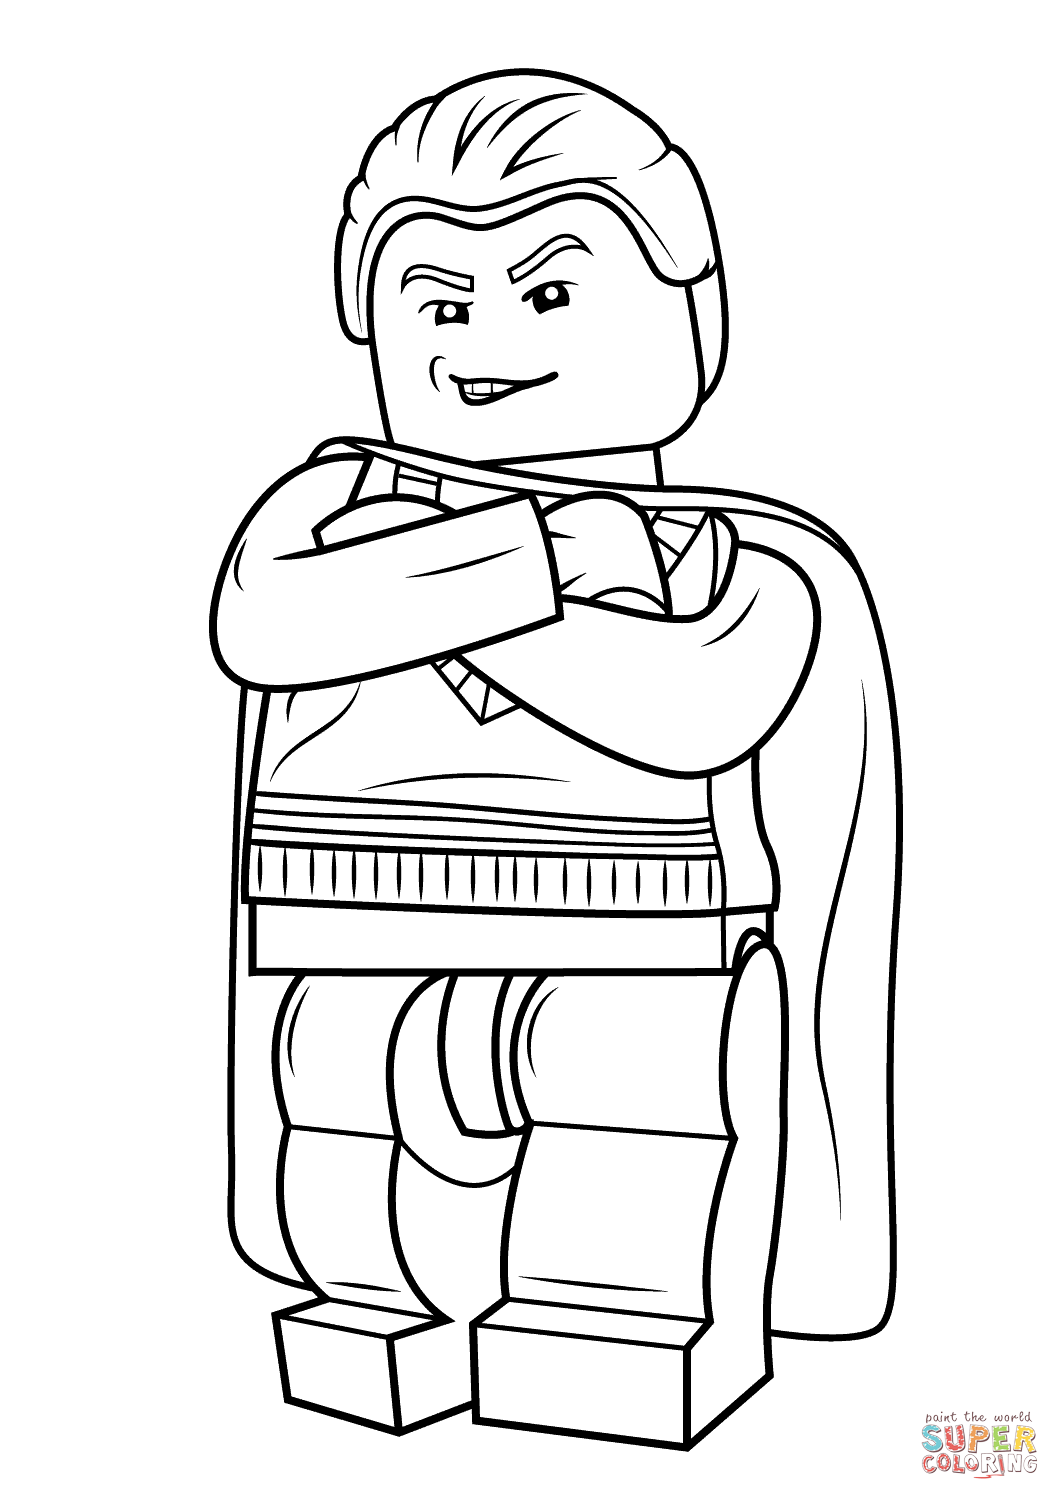 Lego Draco Malfoy coloring page | Free Printable Coloring Pages